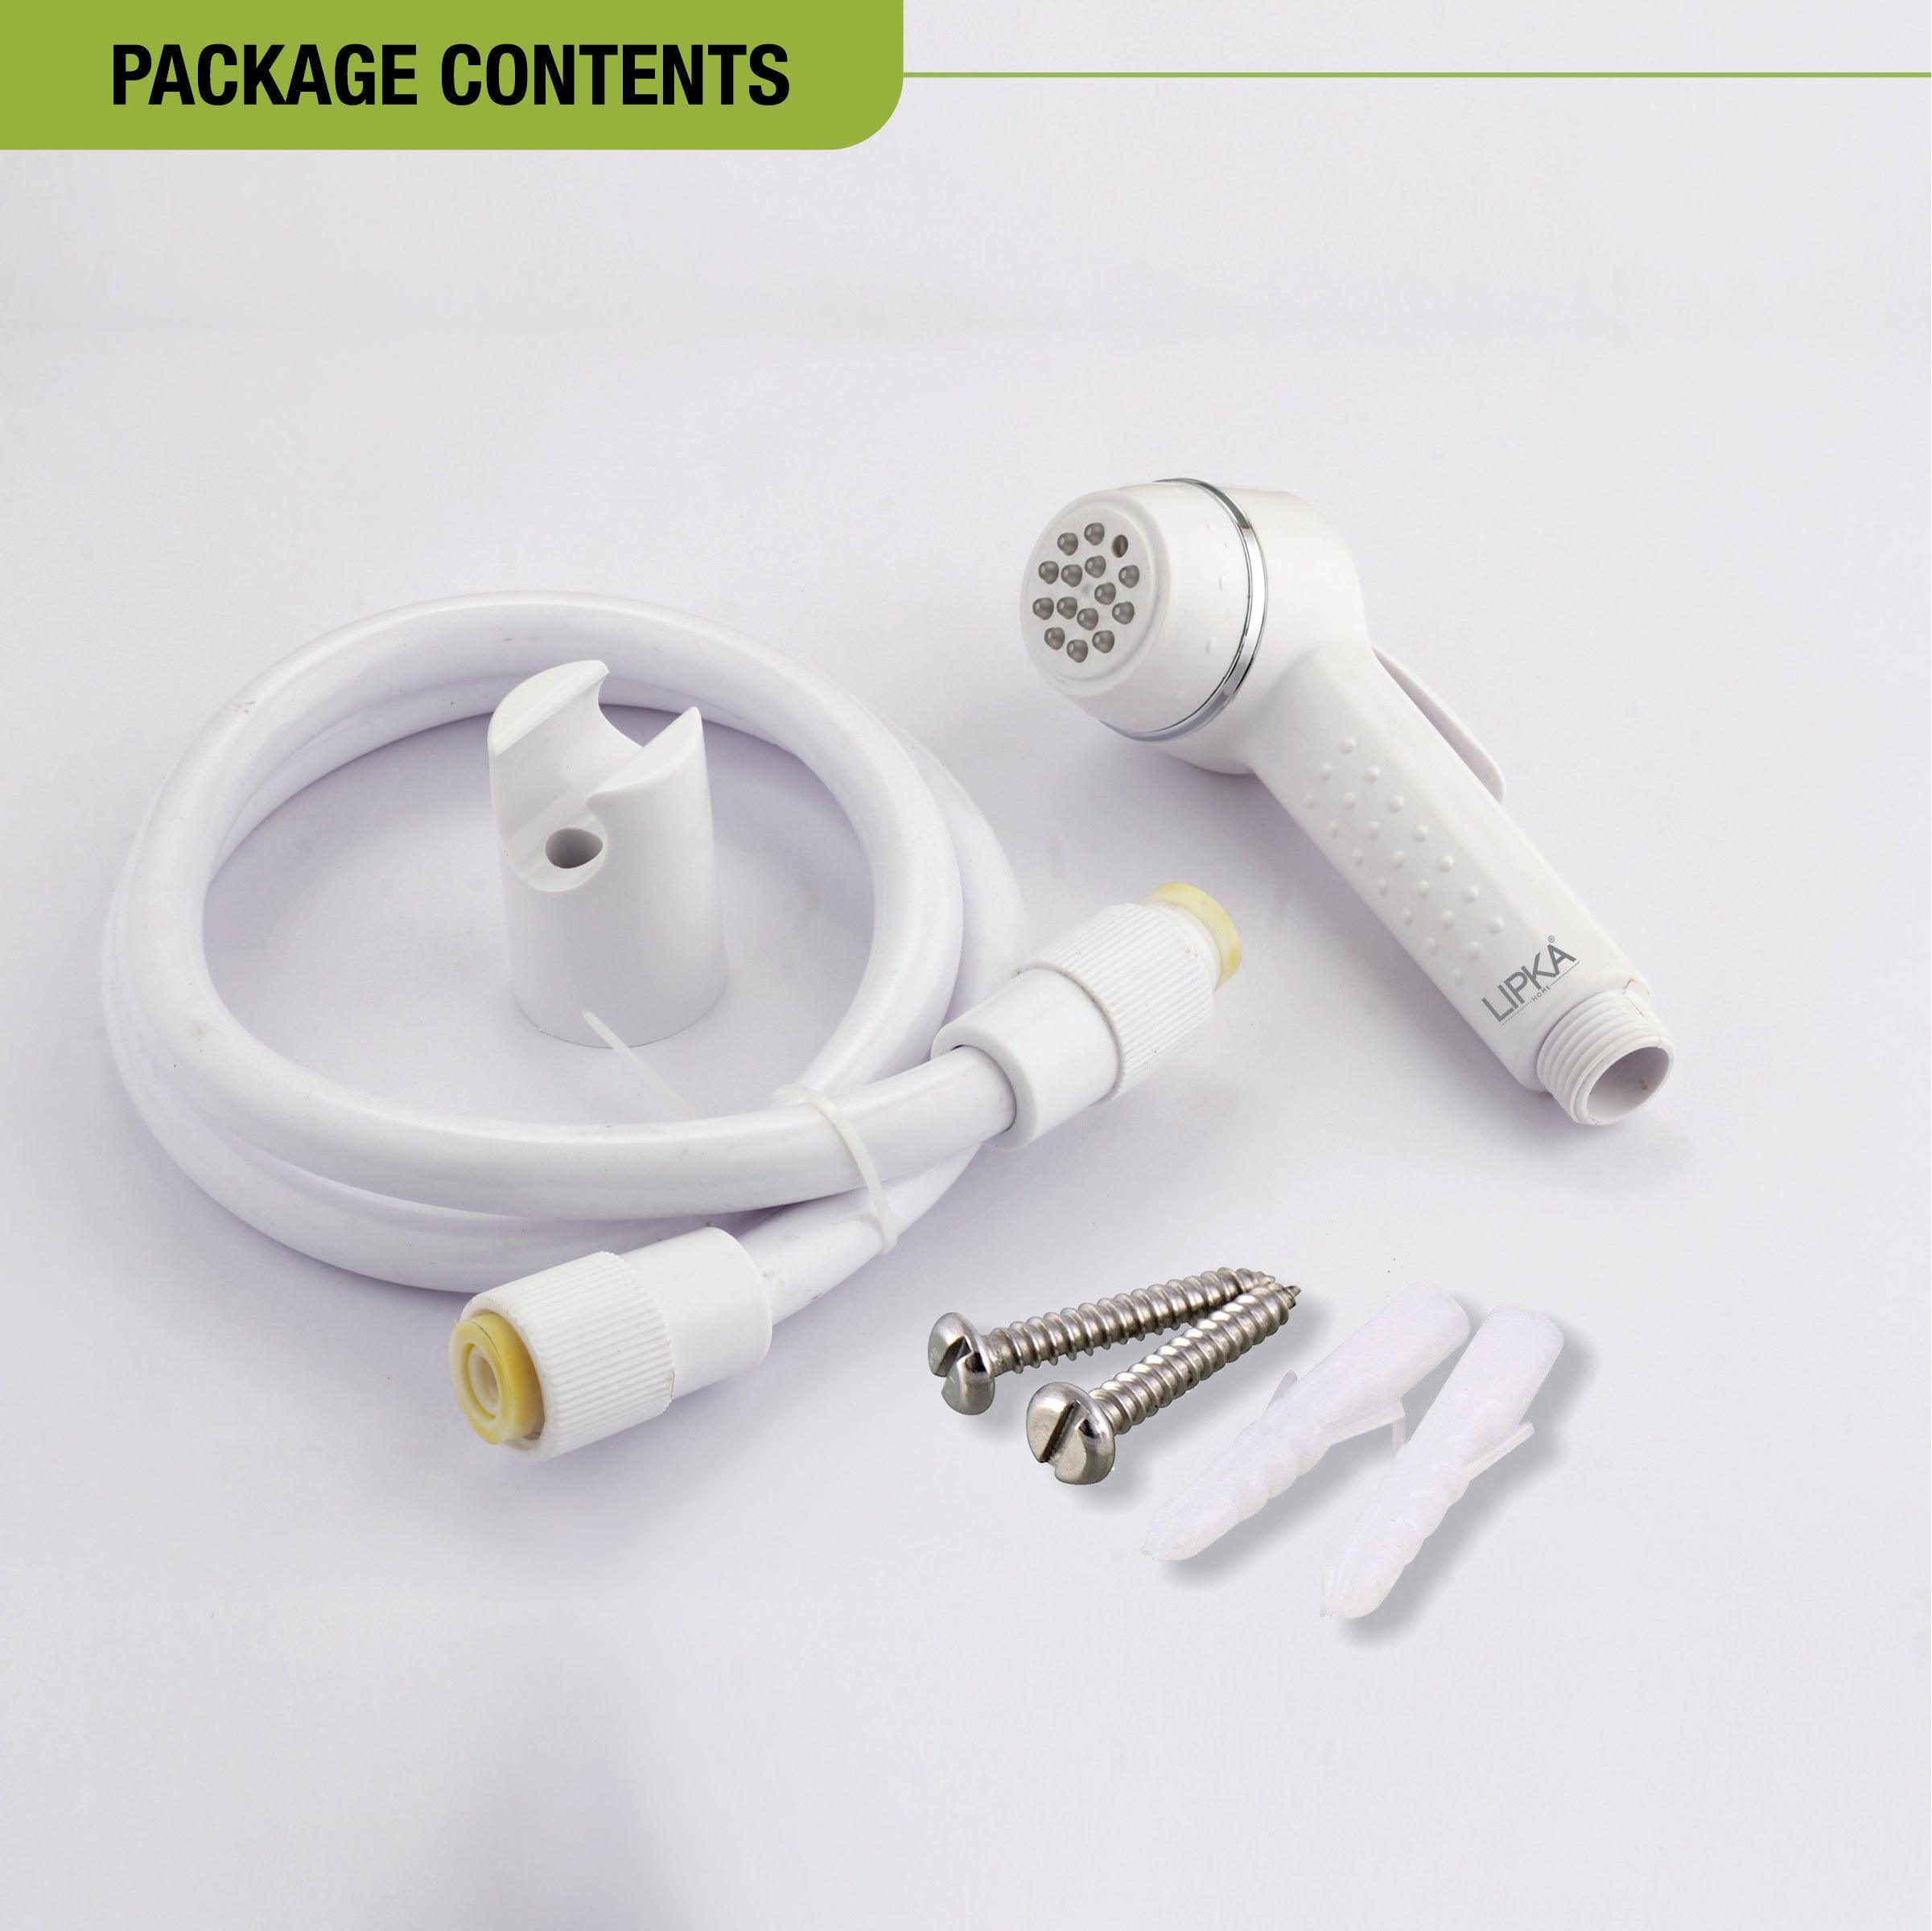 GRH White Health Faucet (Complete Set) package includes